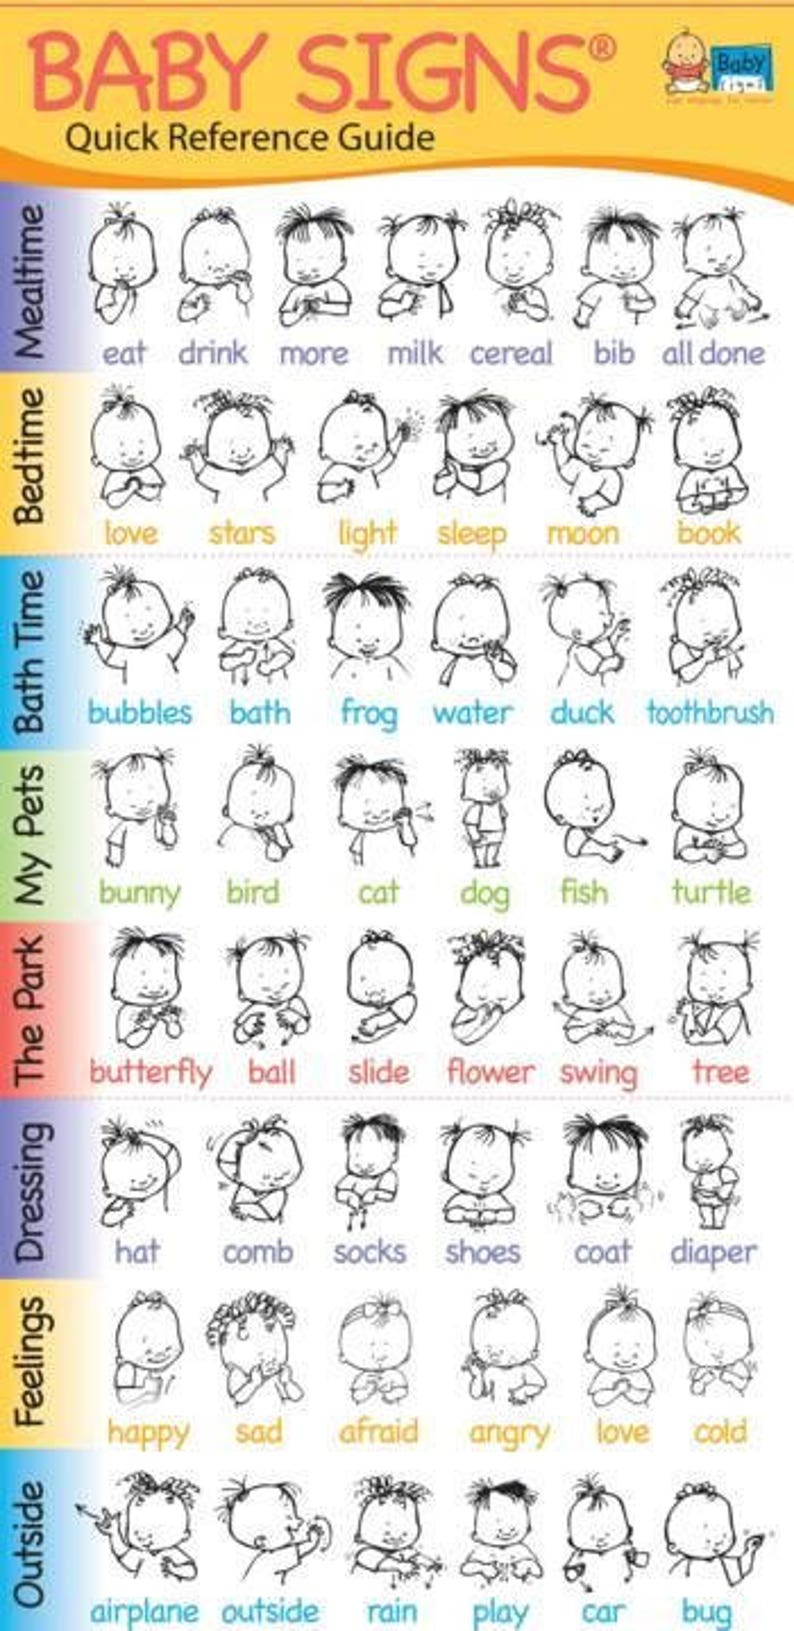 Baby Signs Quick Reference Guide: English Edition image 2